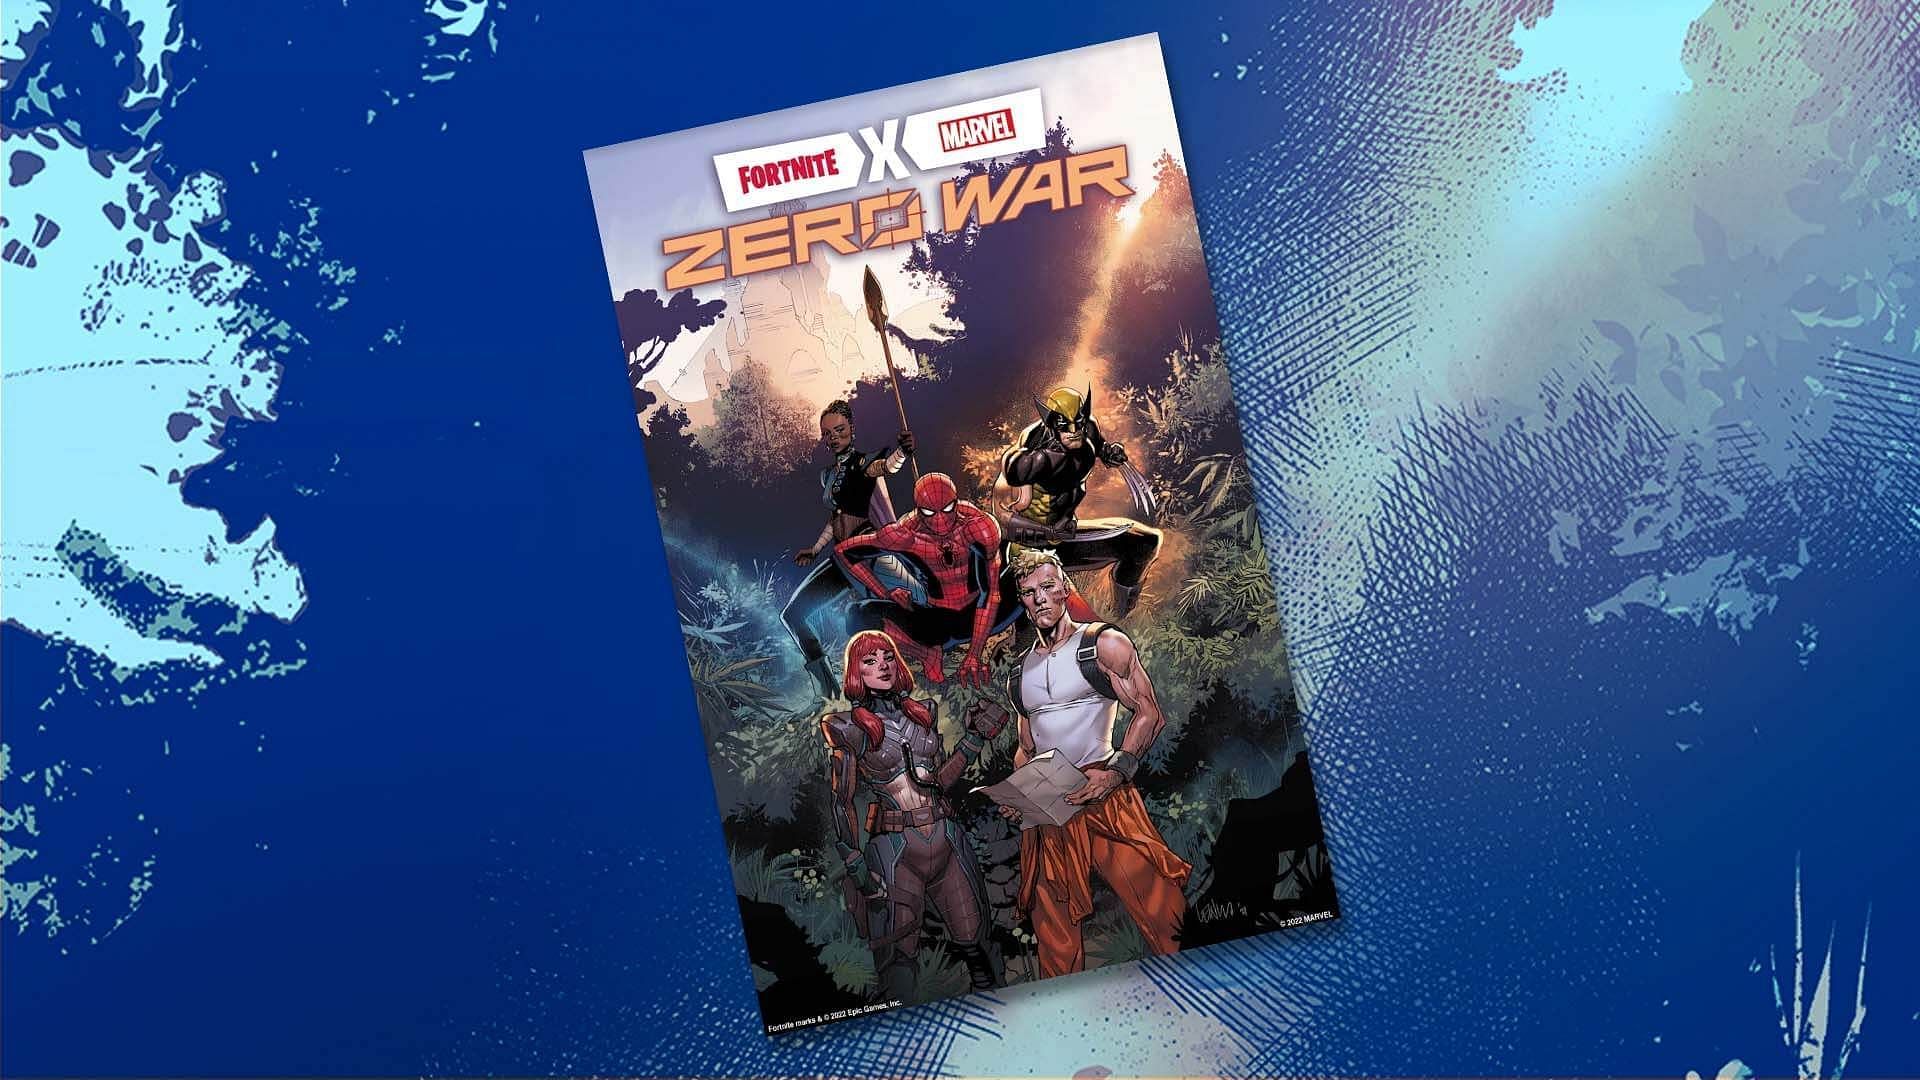 Fortnite x Marvel: Zero War comic books reveal a lot of details about in-game characters (Image via Epic Games)